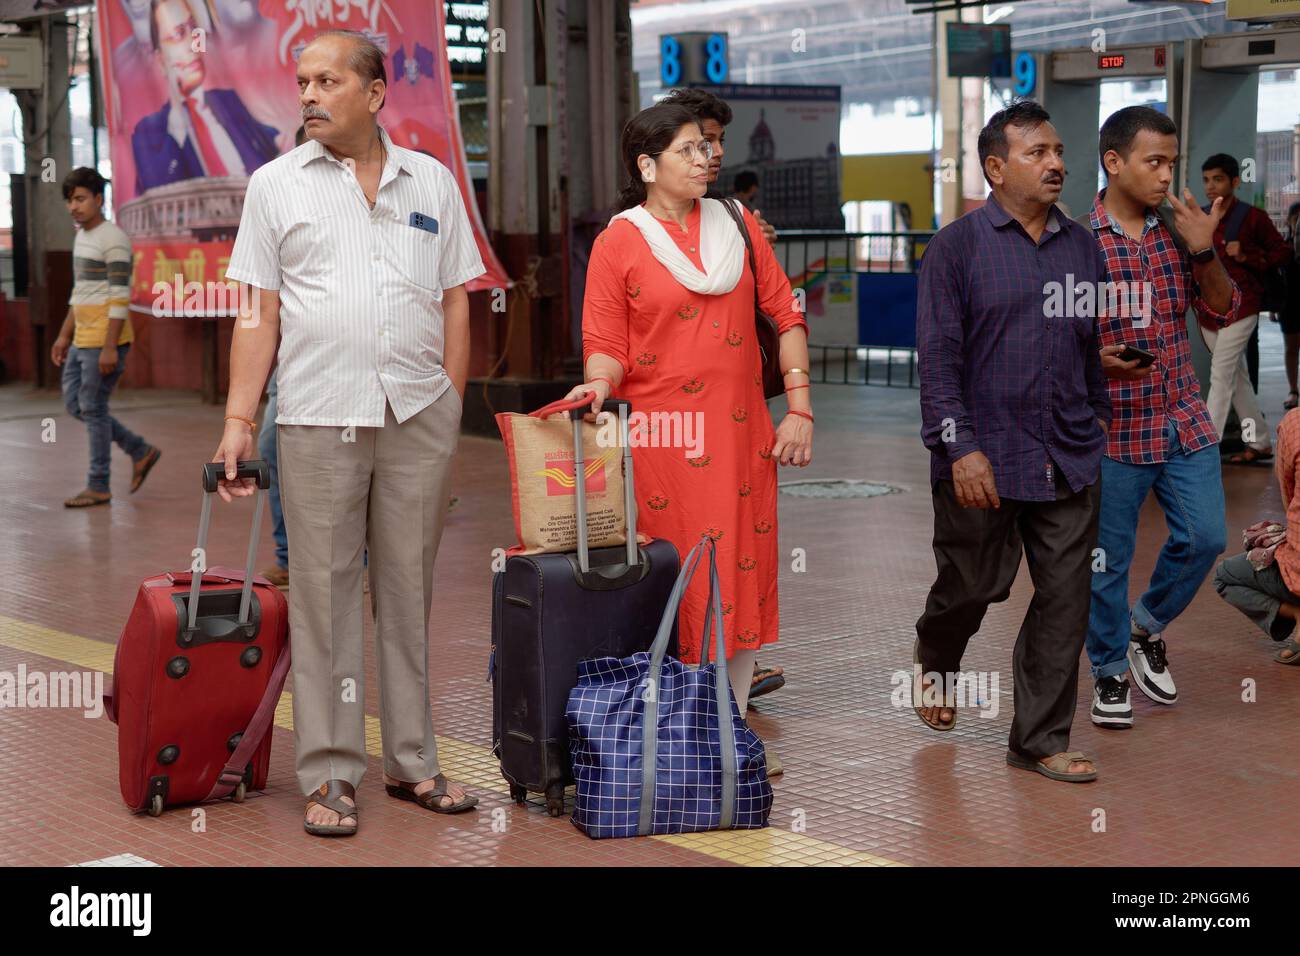 A middle-aged Indian couple with suitcases waiting for their train; Chhatrapati Shivaji Maharaj Terminus, the busiest railway station in Mumbai, India Stock Photo